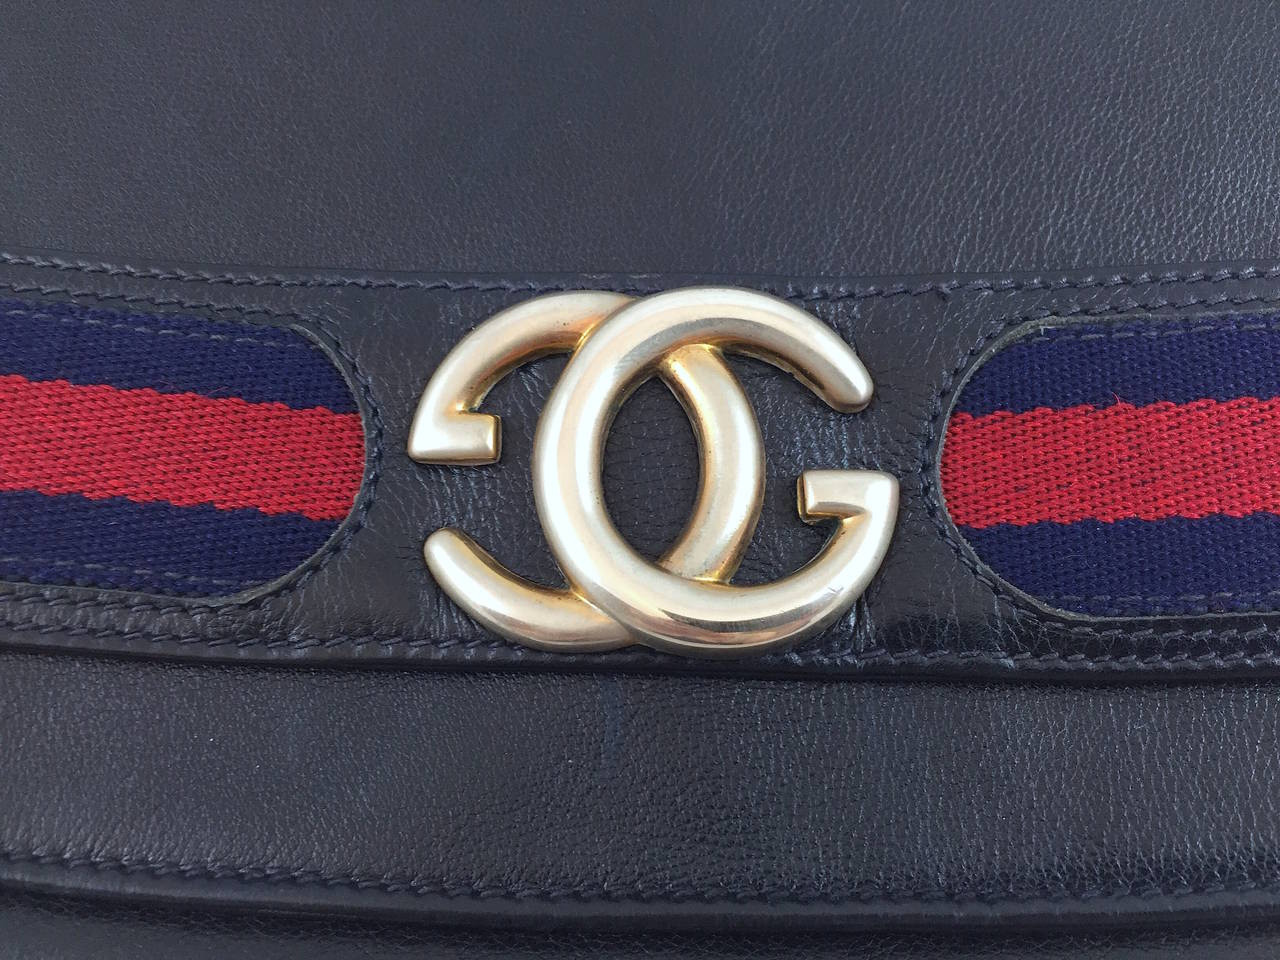 Navy blue leather Gucci vintage clutch with signature navy and red web trim, gold-tone hardware, navy suede lining, interior zip pocket, and GG accent at front flap closure. Circa 1960s.

Measurements: Height 7